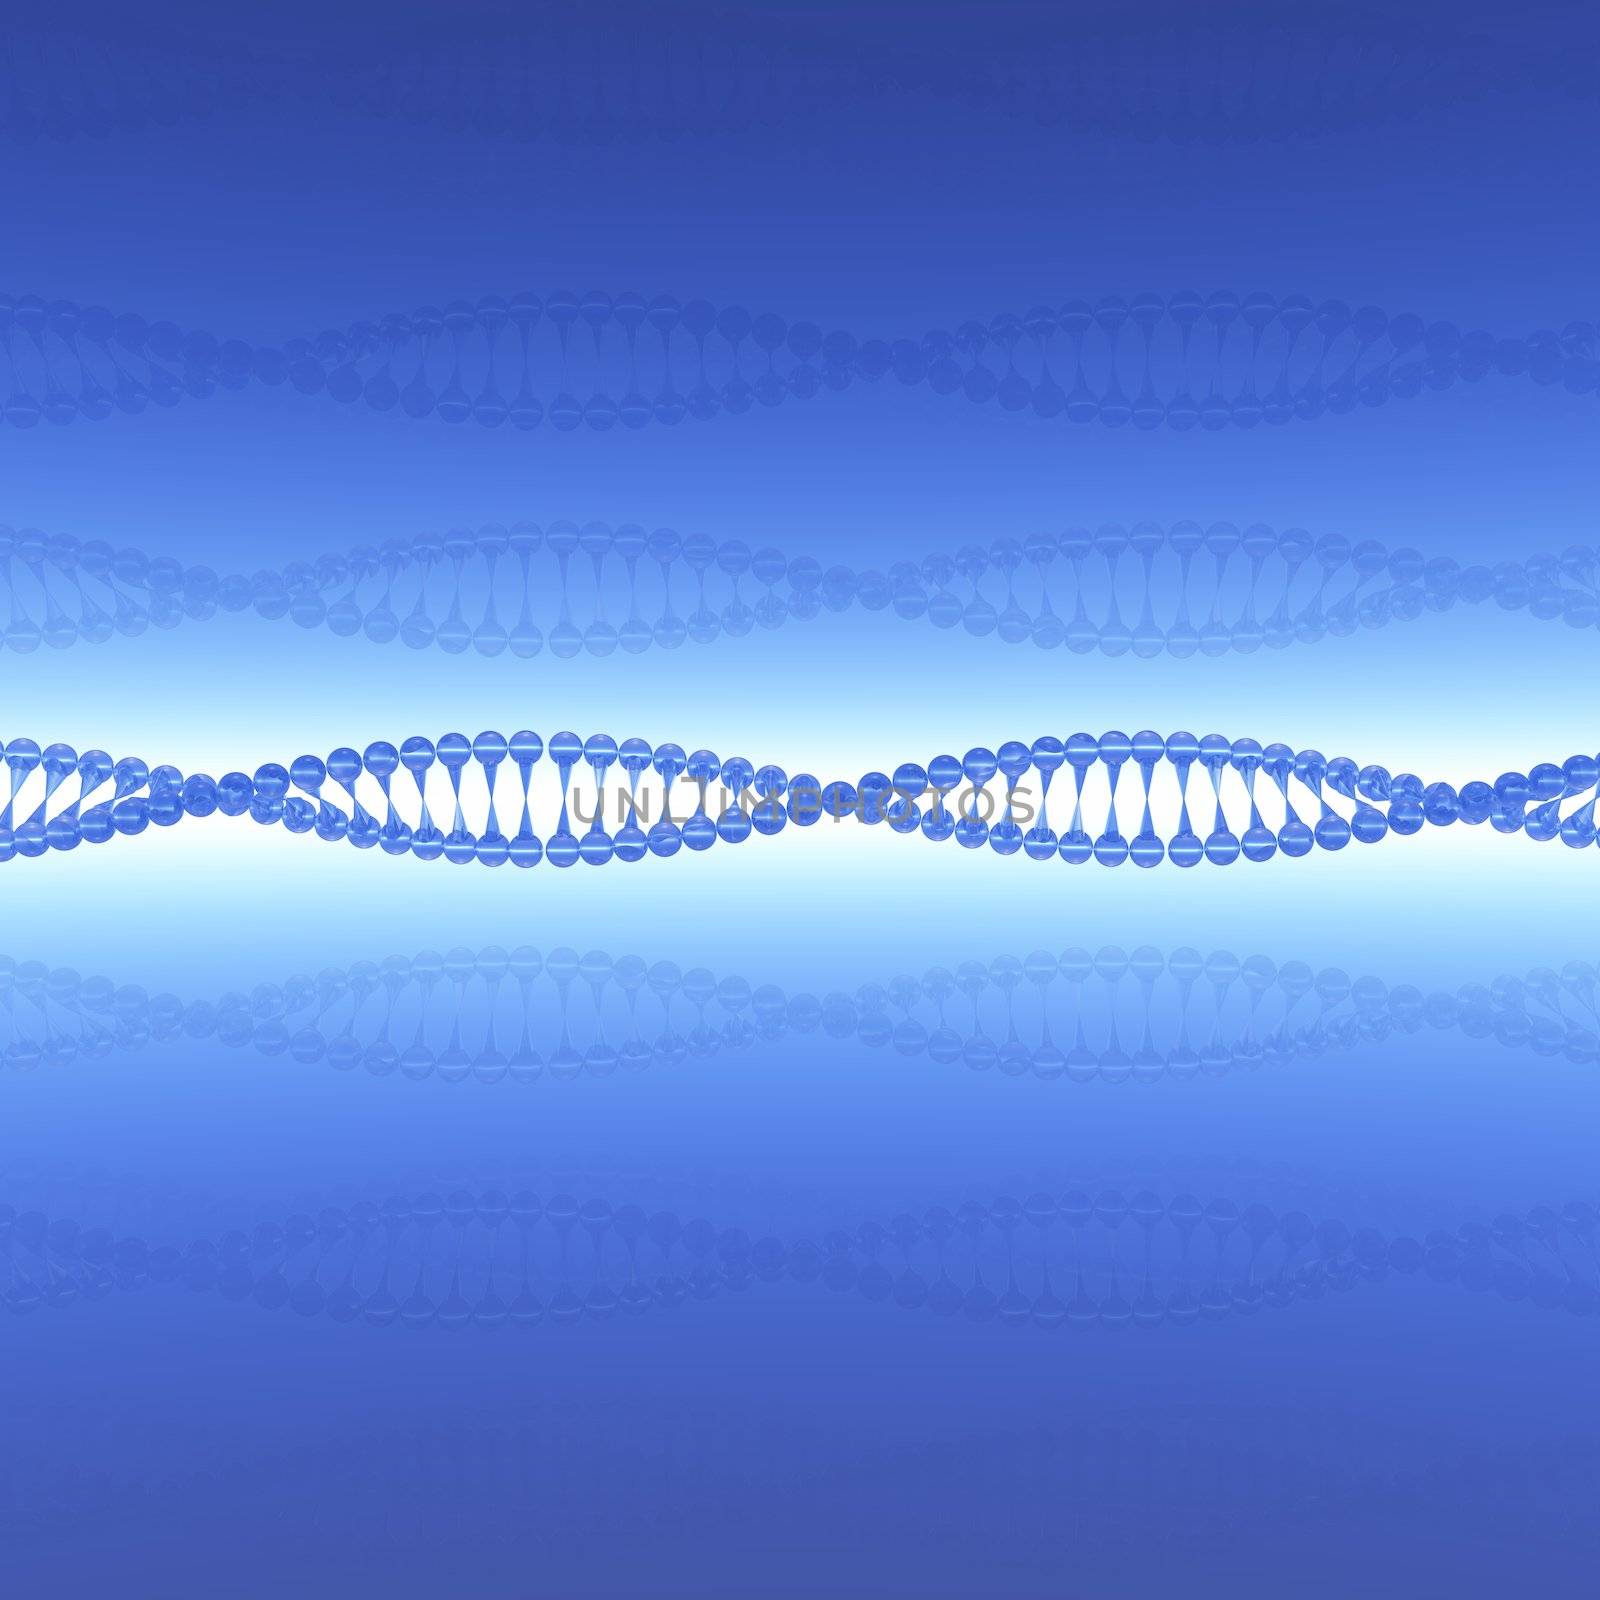 An abstract computer rendered image of DNA.